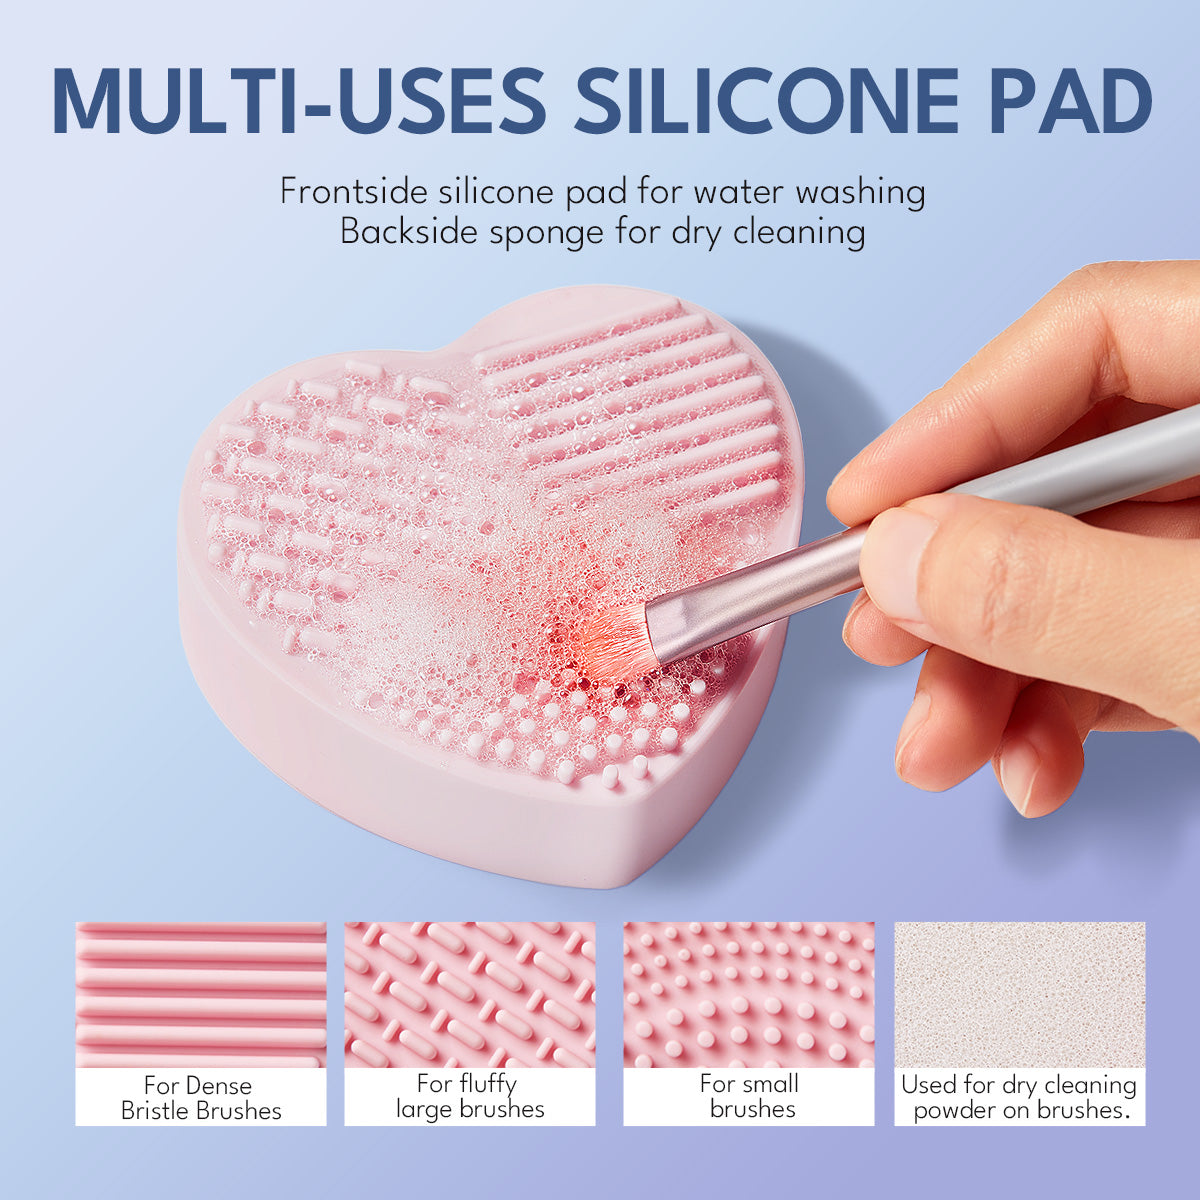 Imakeupnow - All in One Makeup Brush Cleaner Kit【US ONLY】